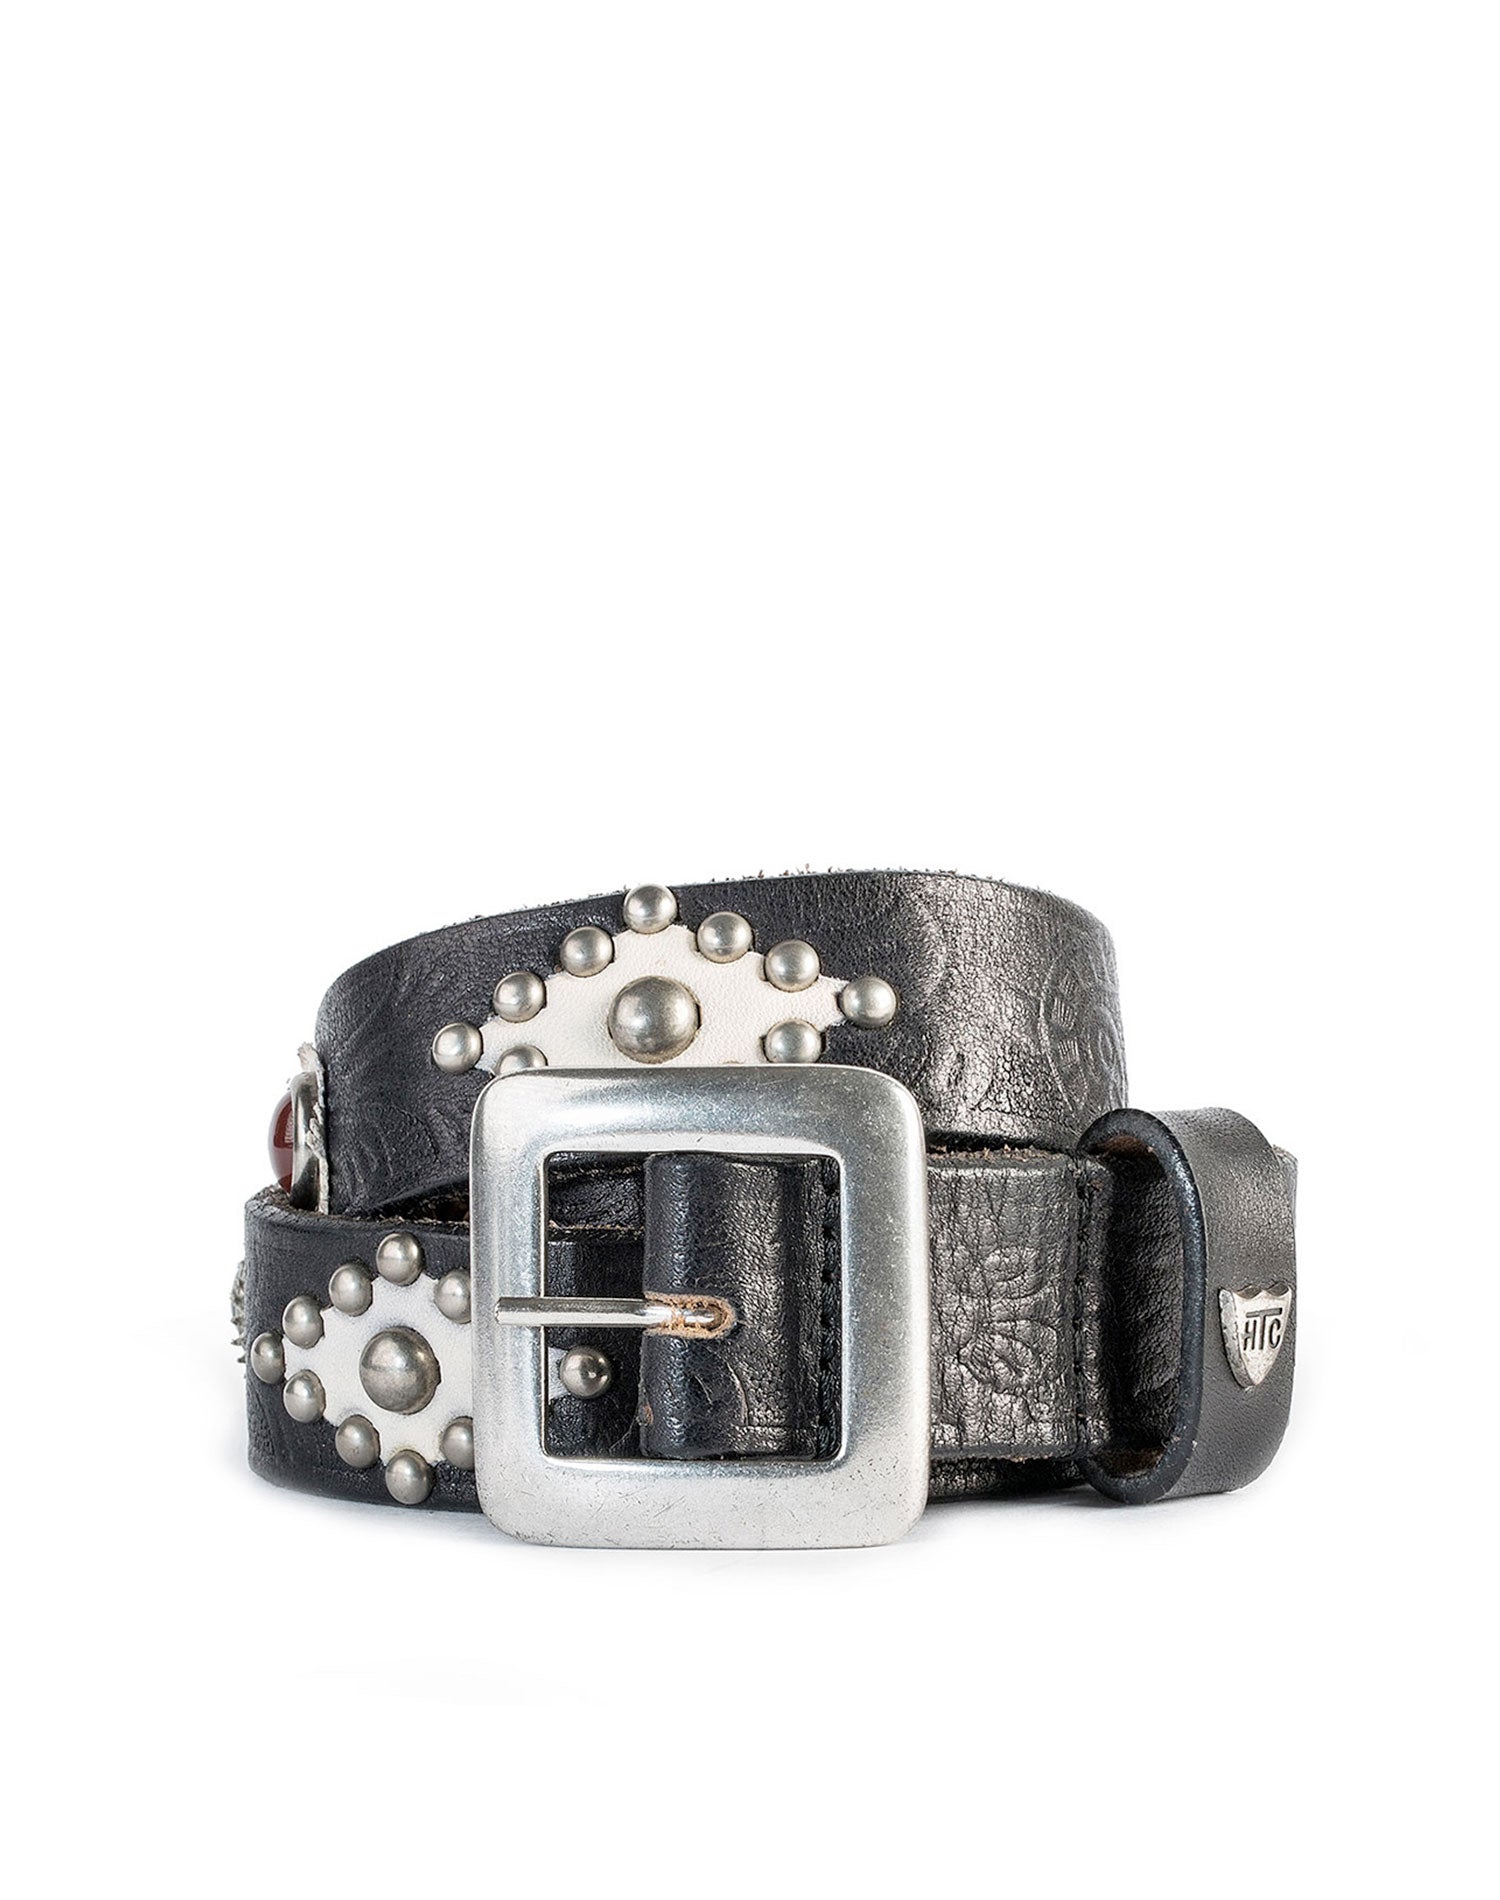 ROUGH ROCK BELT black leather belt, rhombus leather details with glass stones, 3 cm height. Made in Italy HTC LOS ANGELES